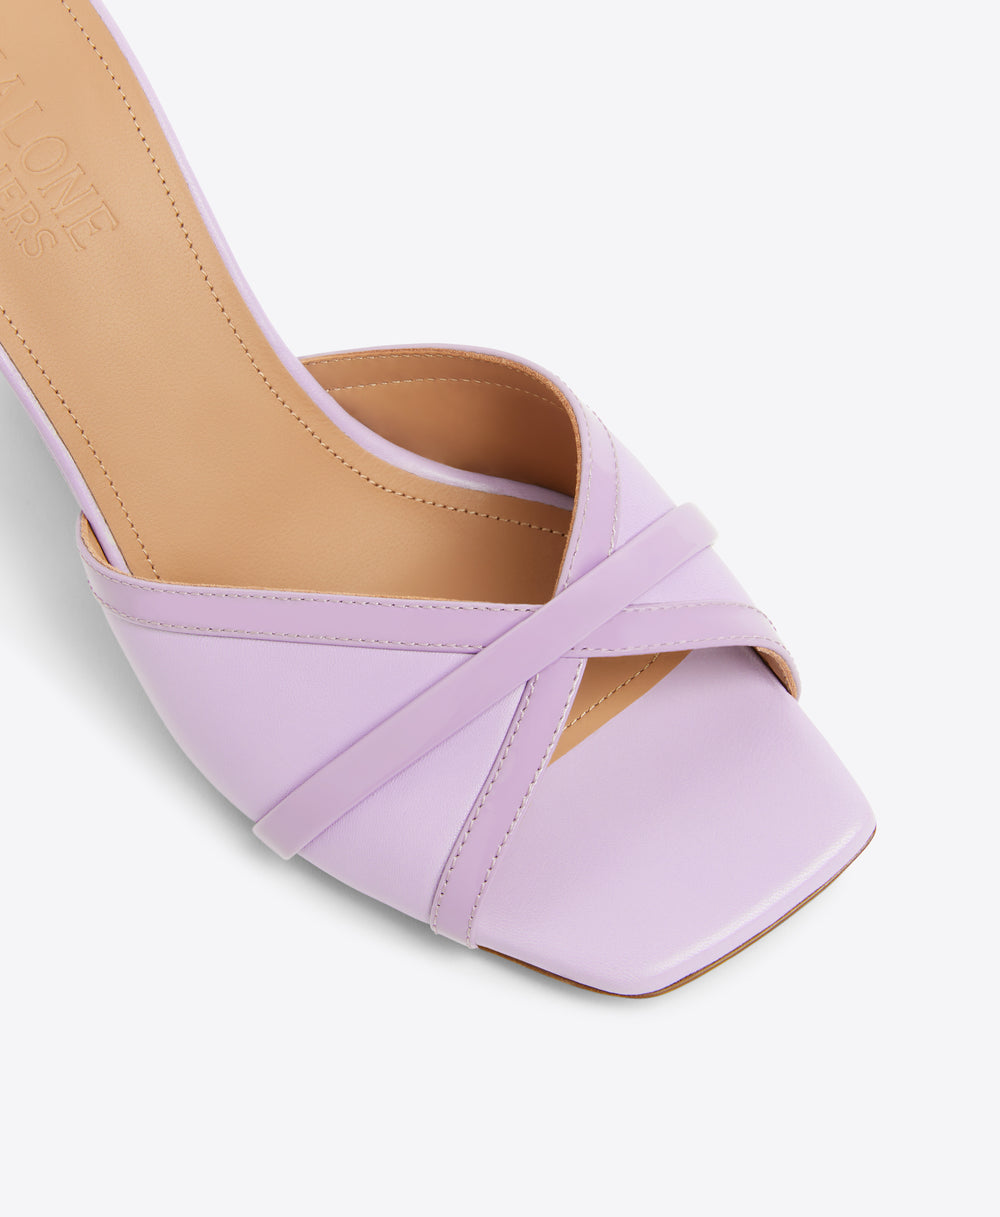 Perla 85 Lilac Leather Wedge Sandals Malone Souliers